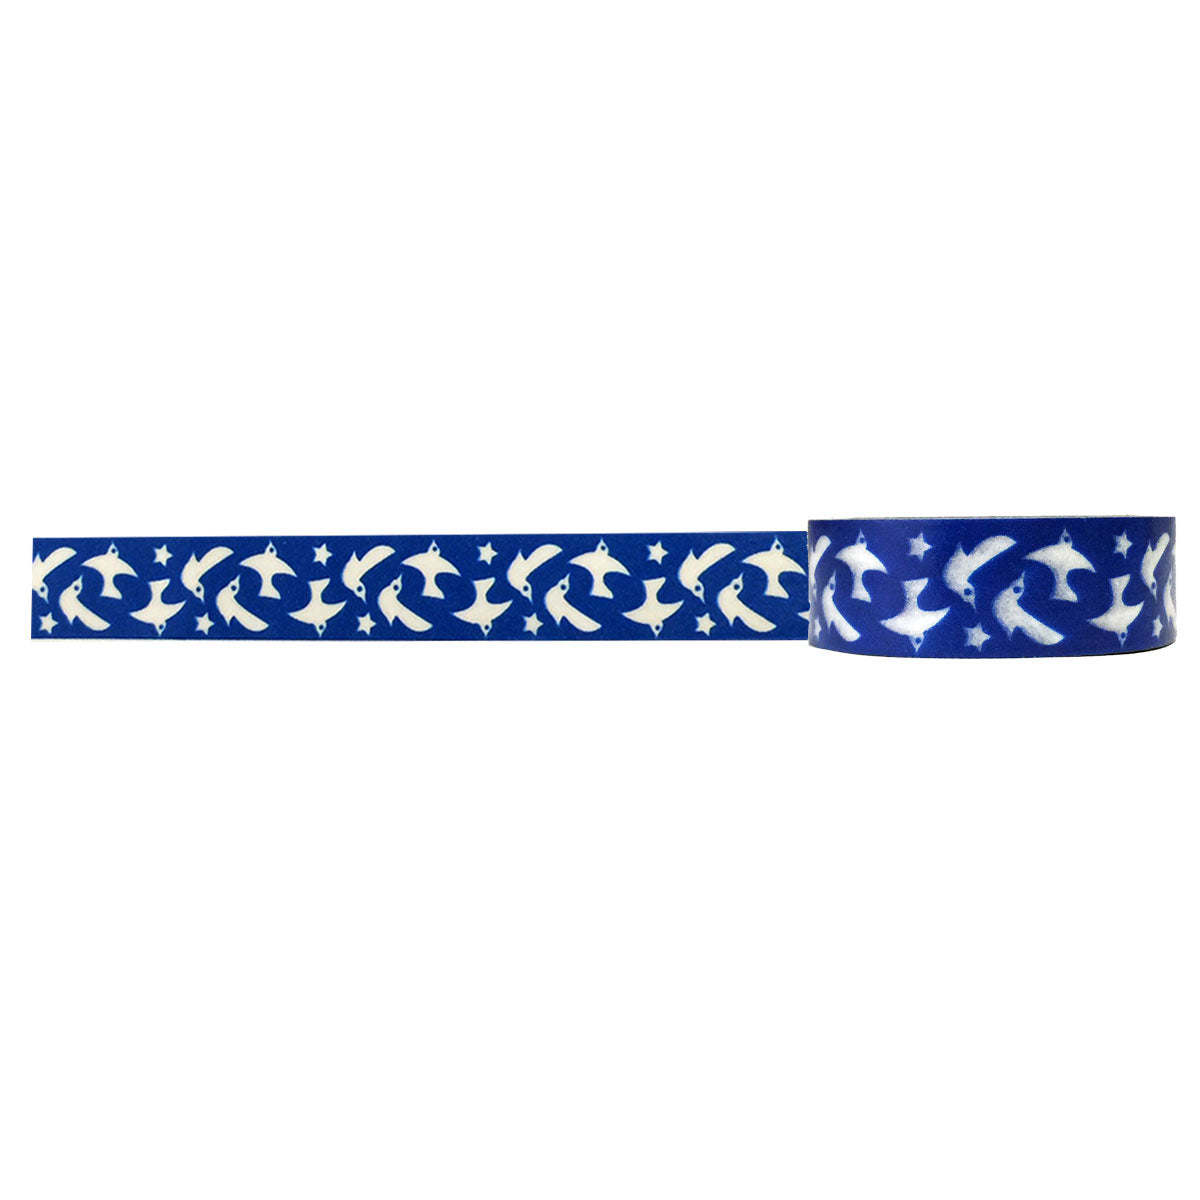 Wrapables Colorful Washi Masking Tape, Midnight Passion Chevron, Blue